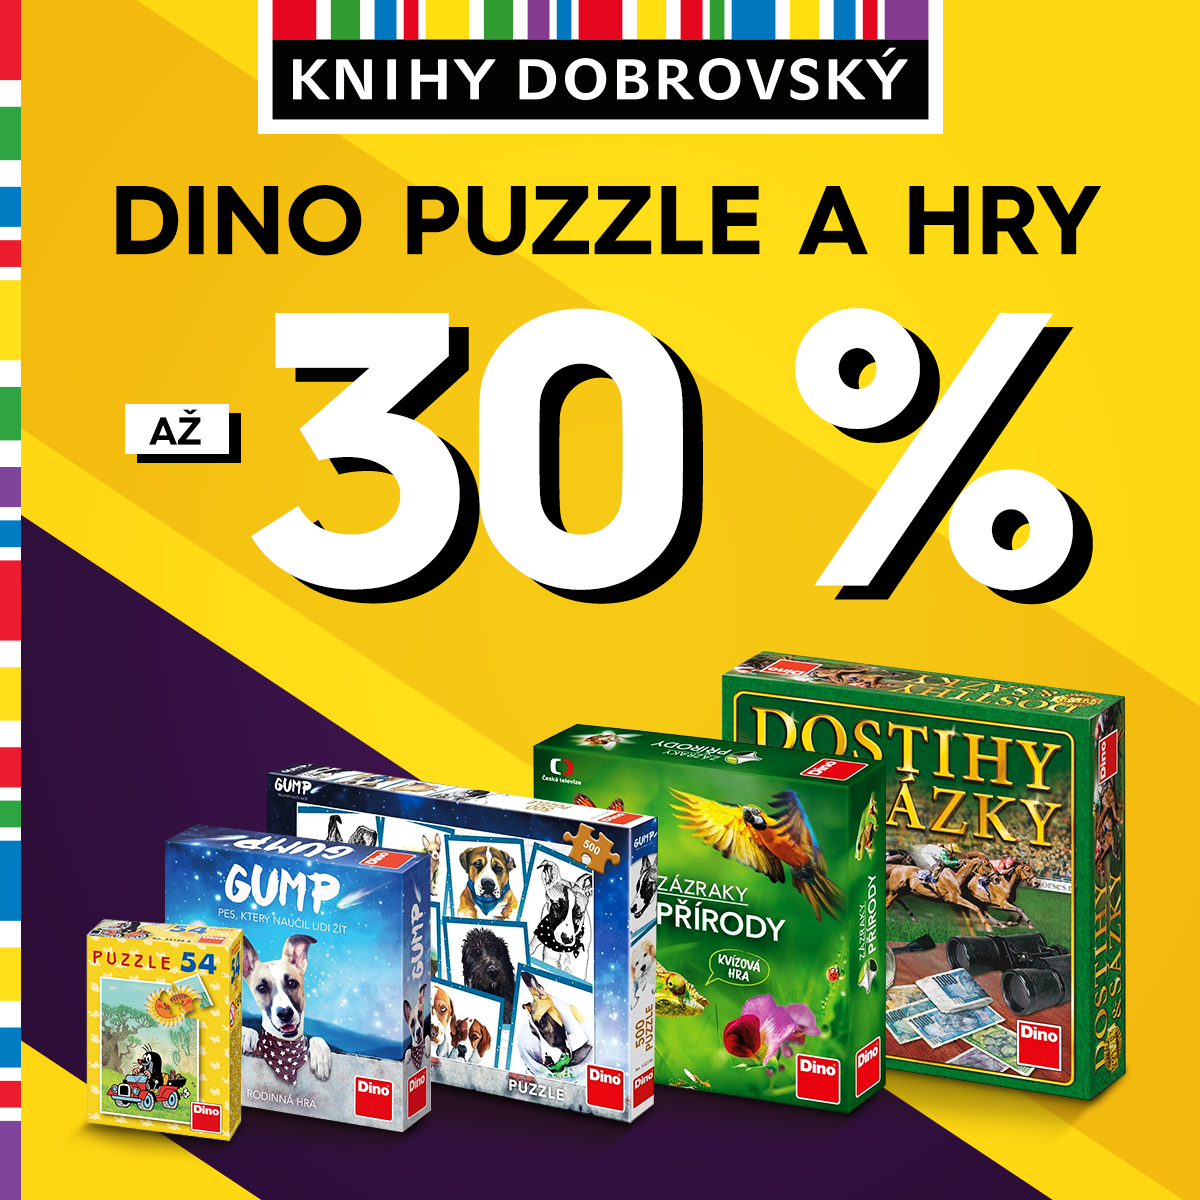 Dino puzzle a hry